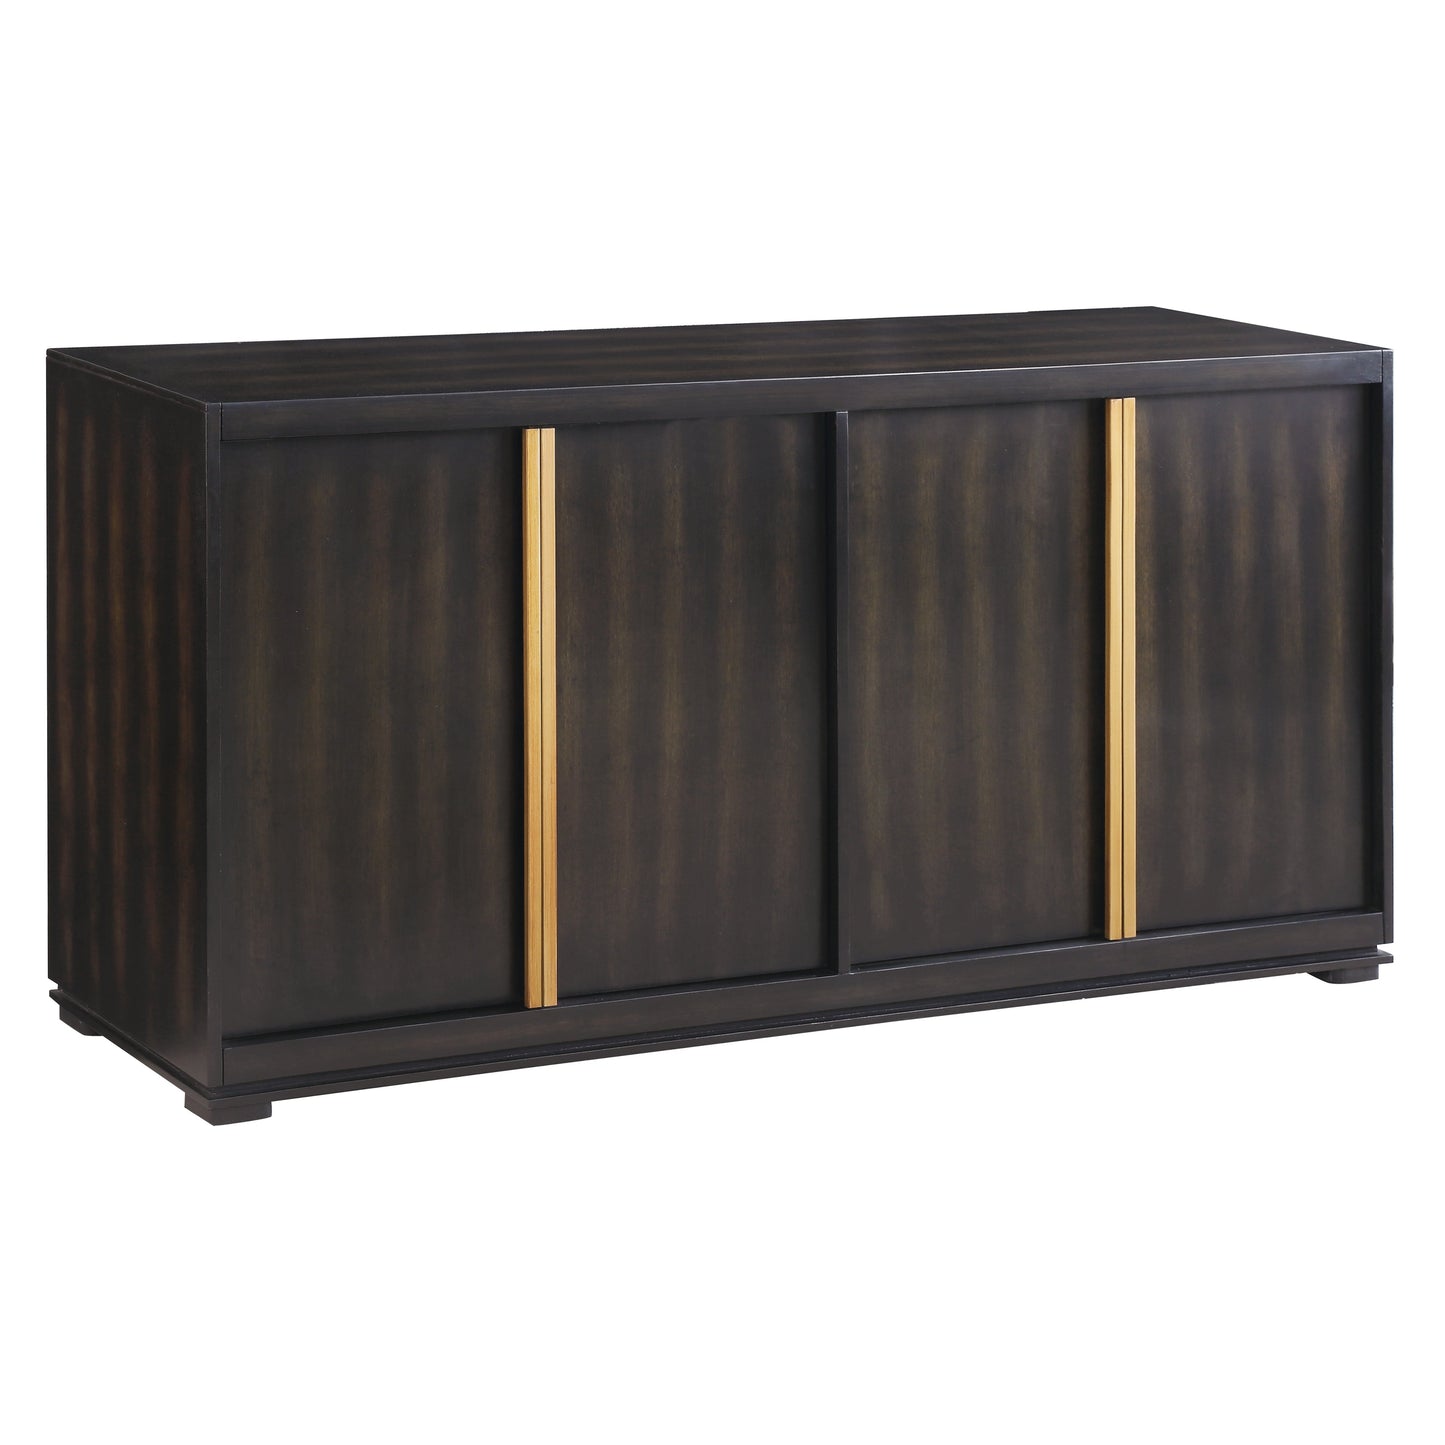 Crestview Collection Empire 72" x 17" x 35" 4-Door Transitional Dark Brown Wood And Metal Sideboard With Burnished Brass Hardware In Rich Jacobean Finish